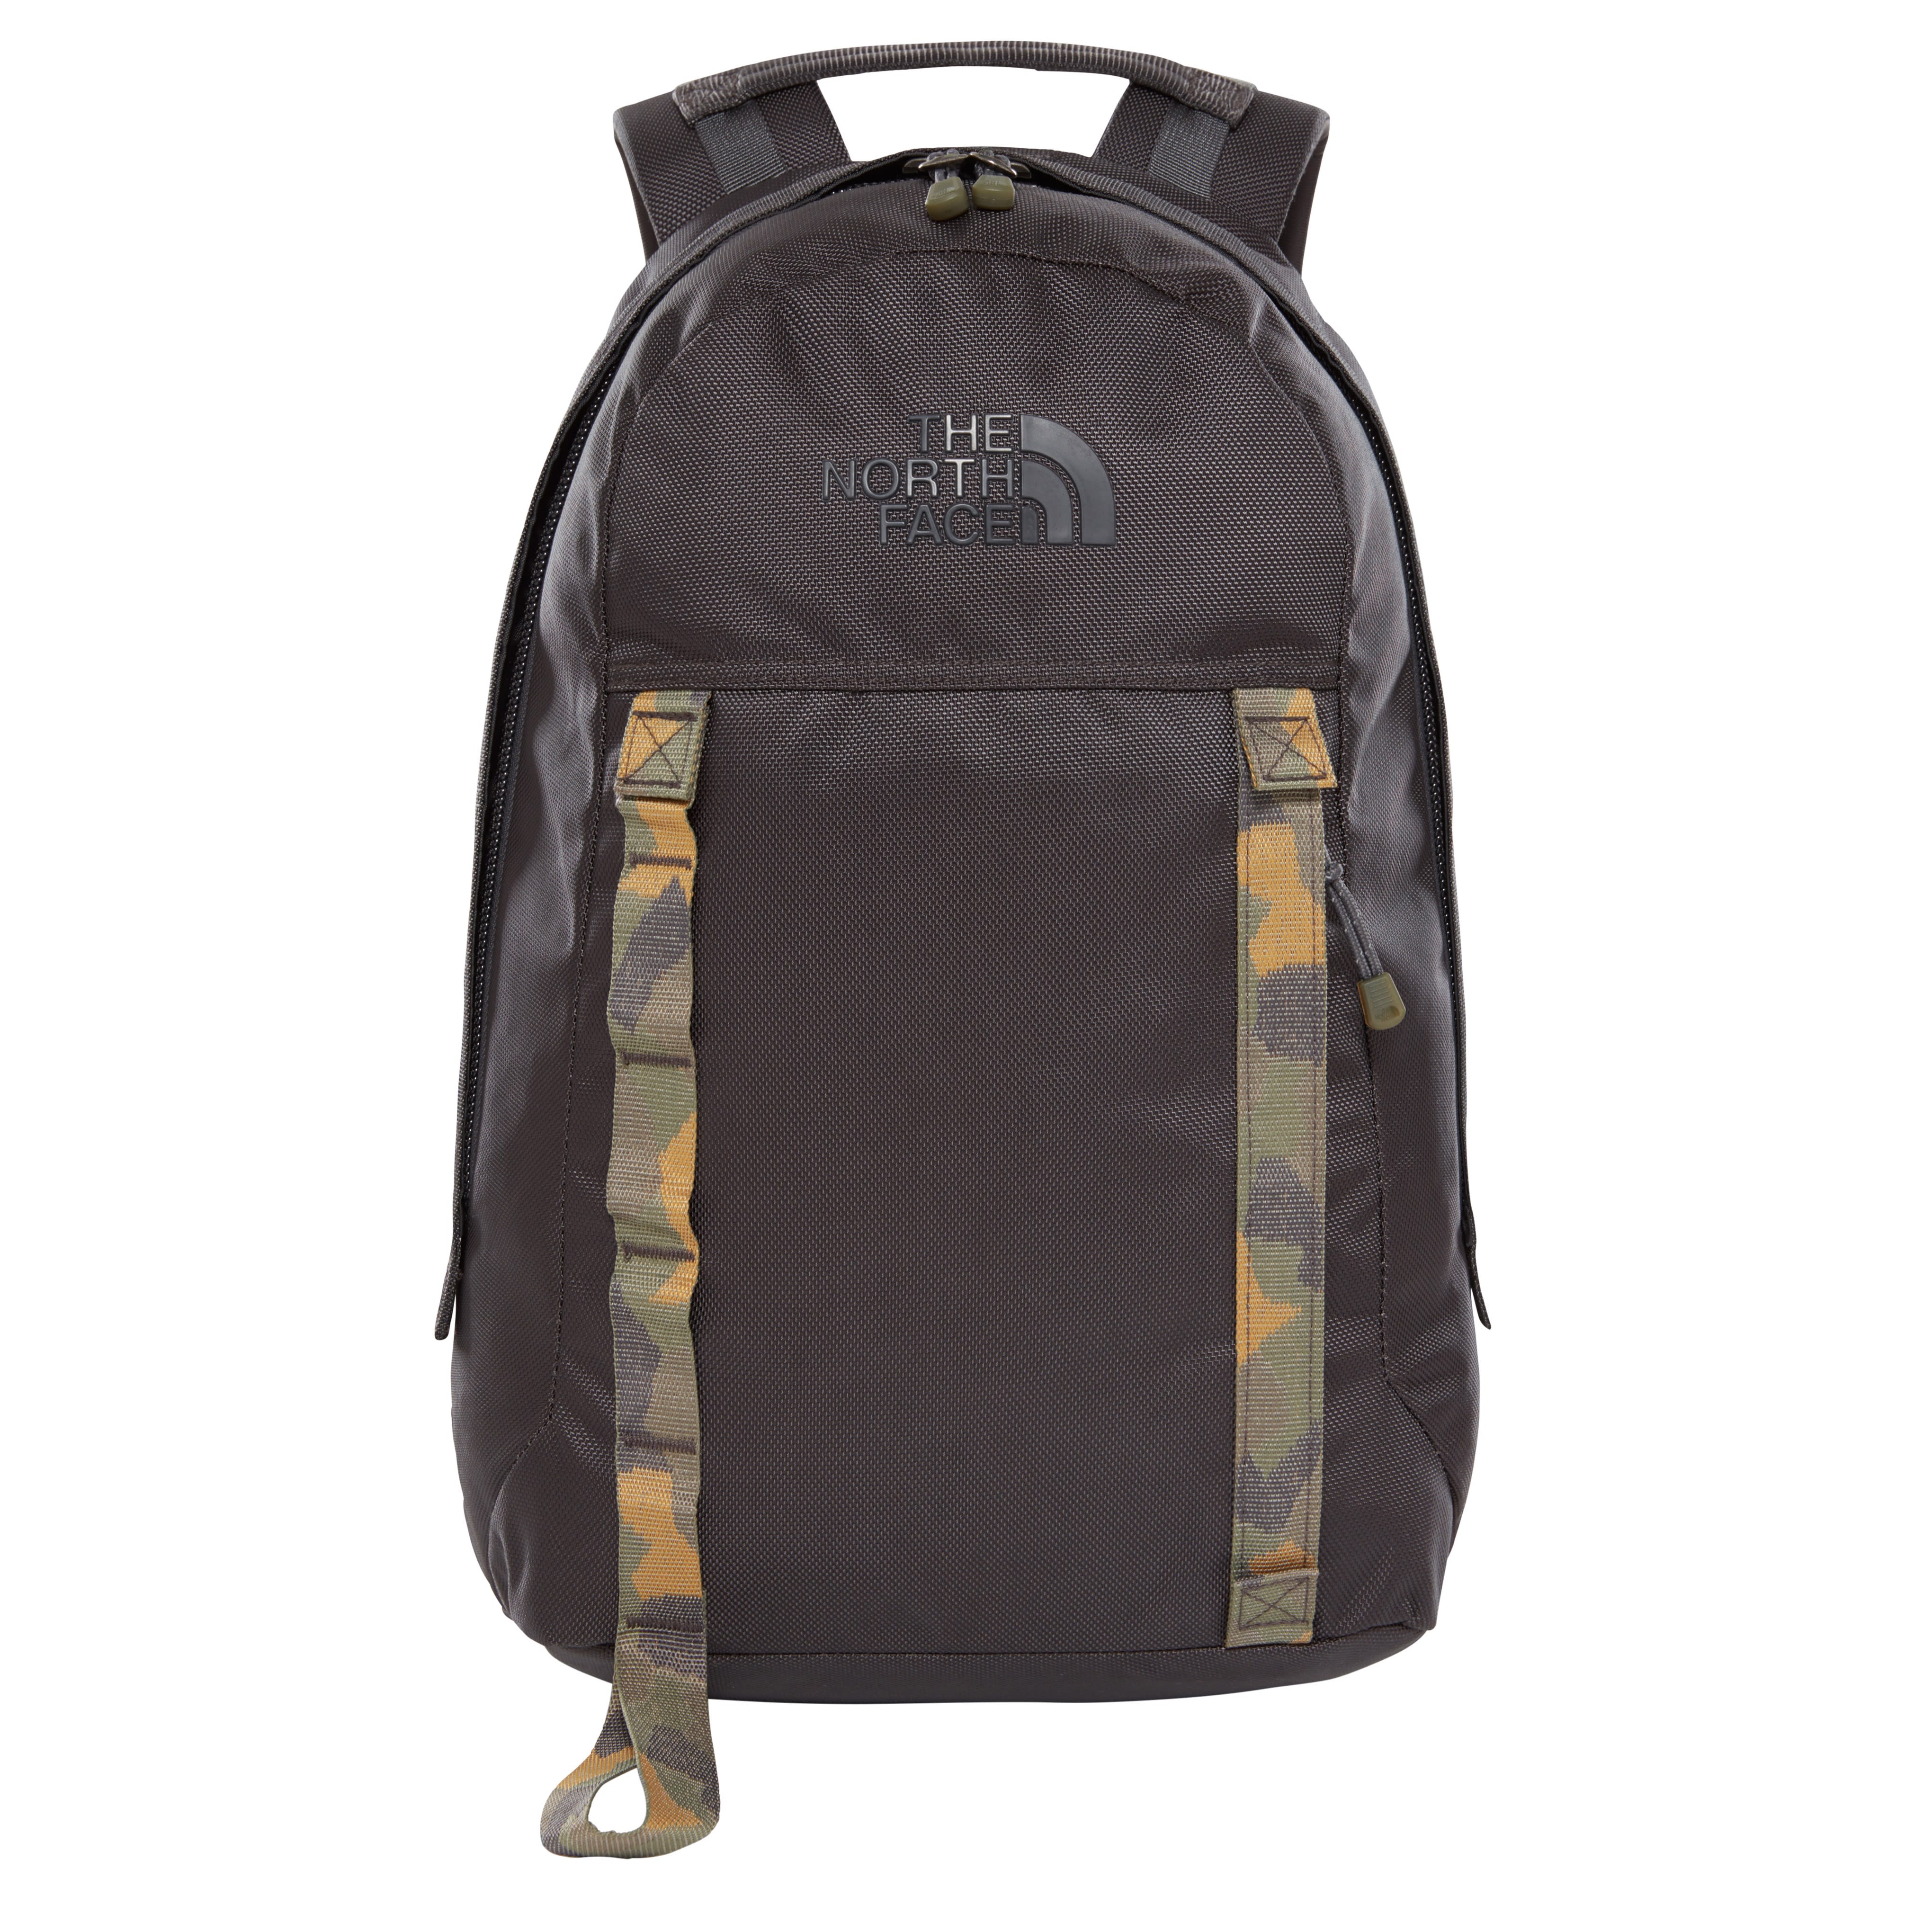 north face lineage pack 20l backpack